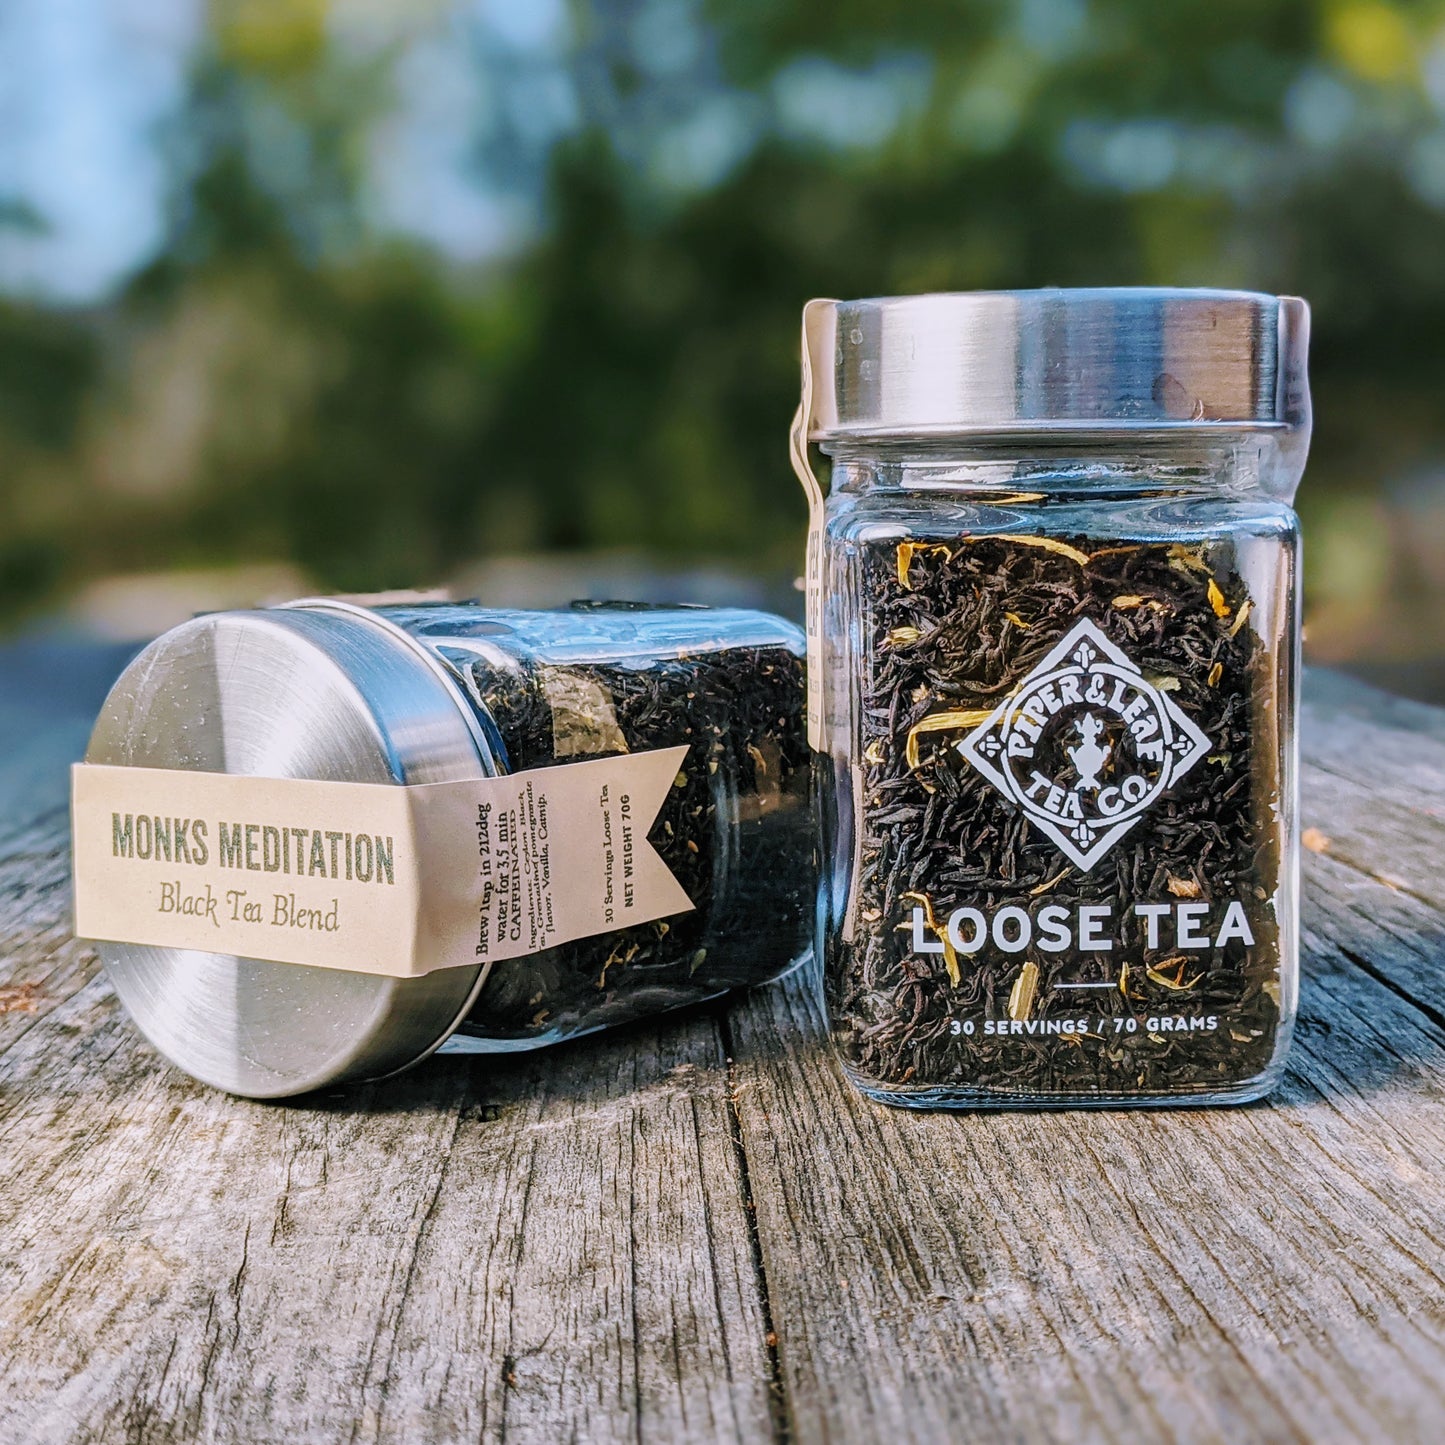 Two jars of Monks Meditation Glass Jar of Loose Leaf Tea - 30 Servings by Piper & Leaf Tea Co. placed on a wooden surface.